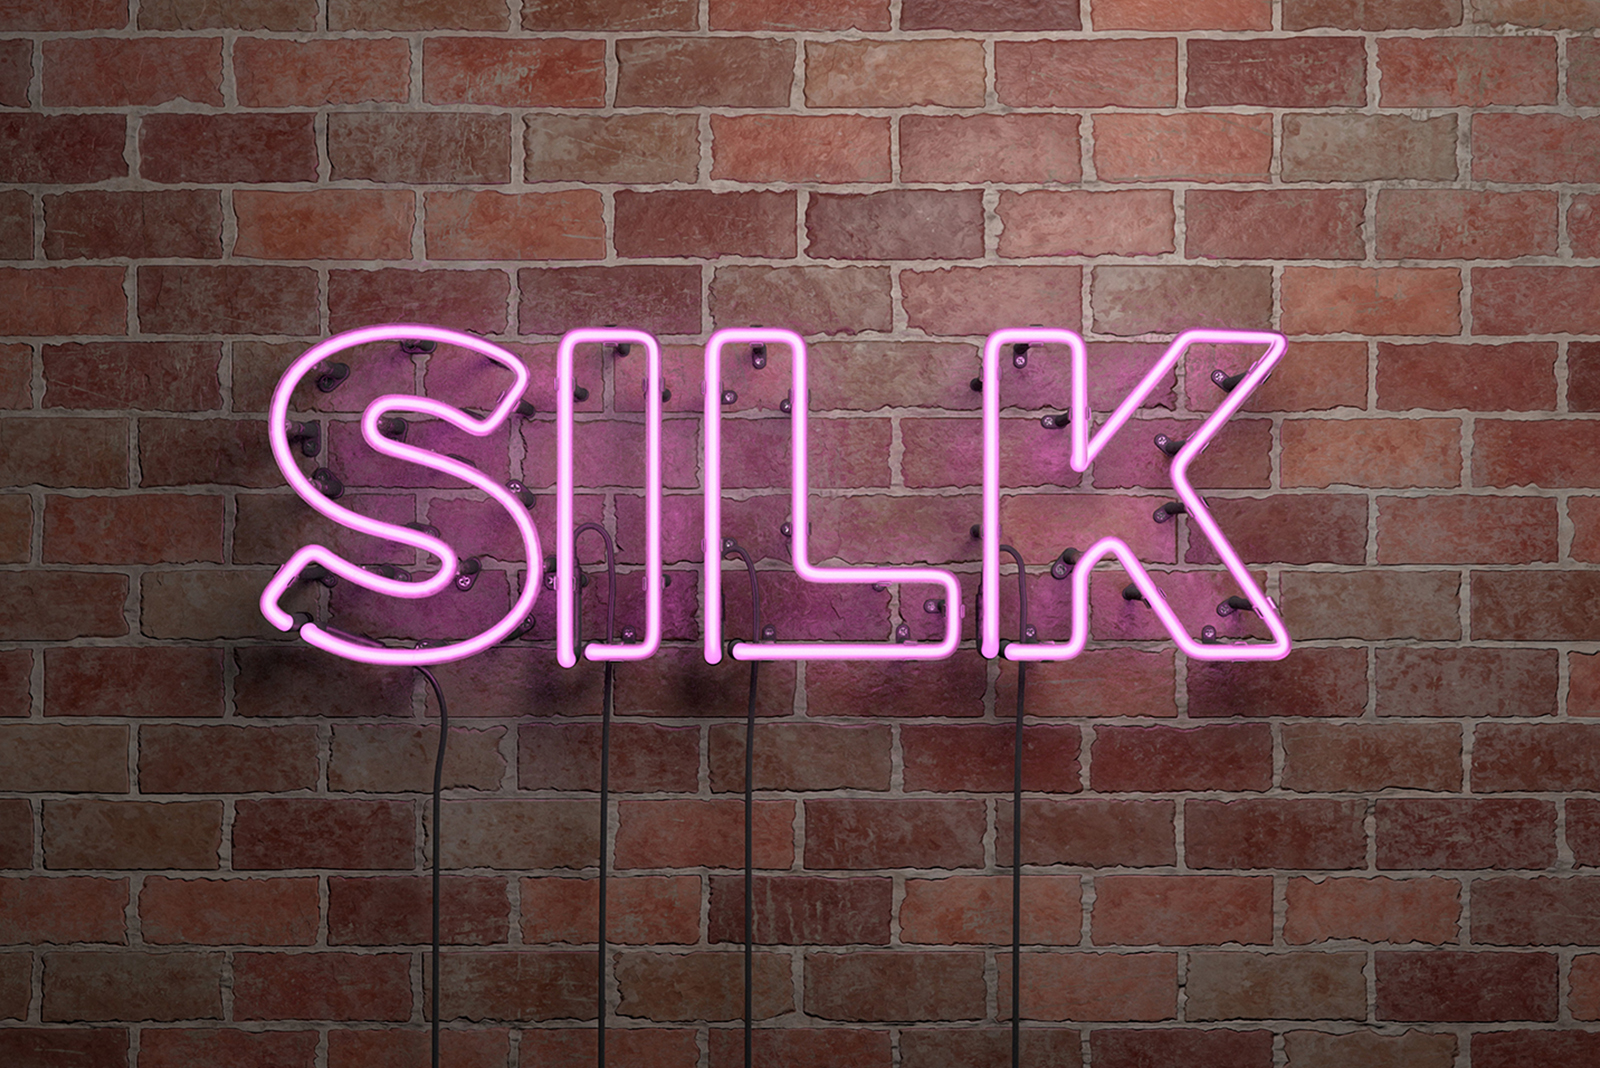 Real Silk vs Faux Silk: How to Choose the Best one for Your Project